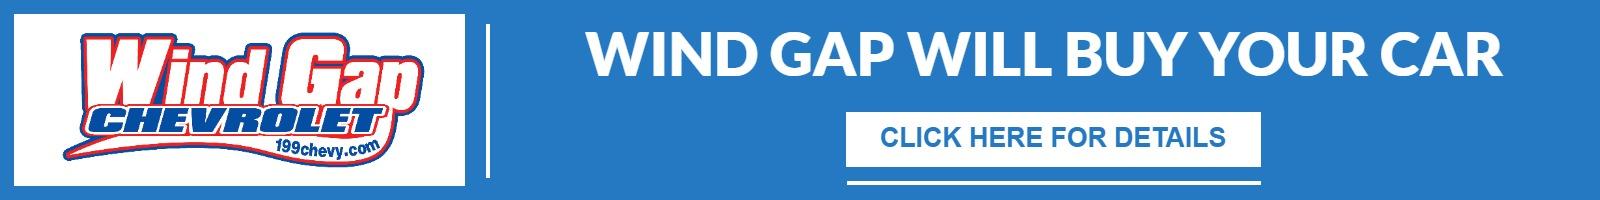 WIND GAP WILL BUY YOUR CAR - SELL OR TRADE IN YOUR CAR IN READING.